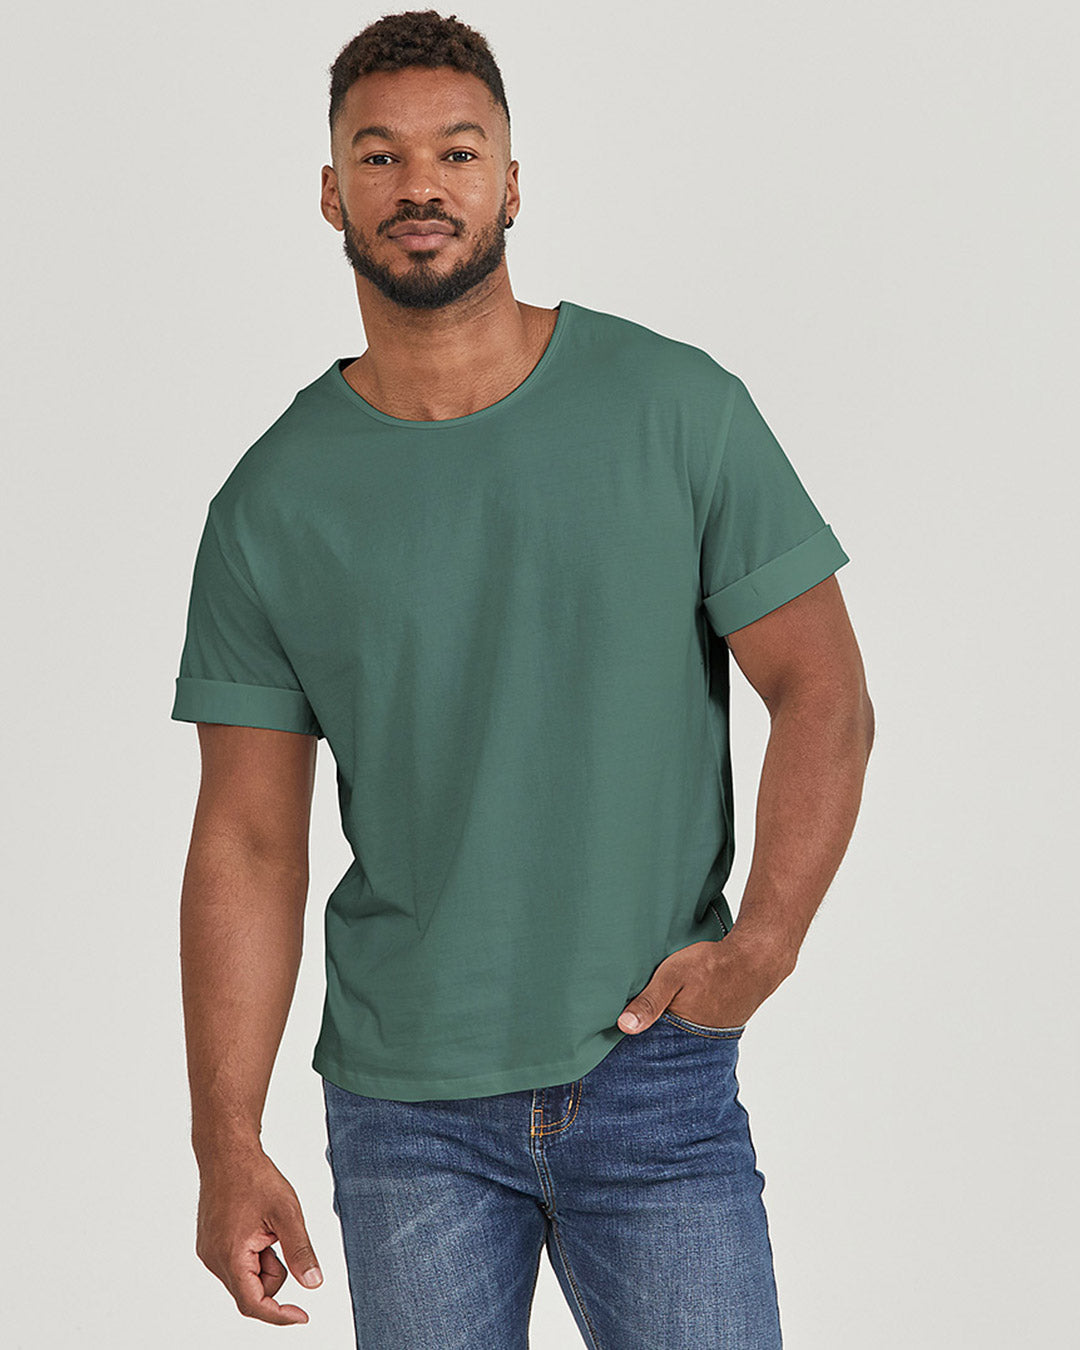 Mens Magic Fit® T-shirts in limited edition Verdigris | Citizen Wolf